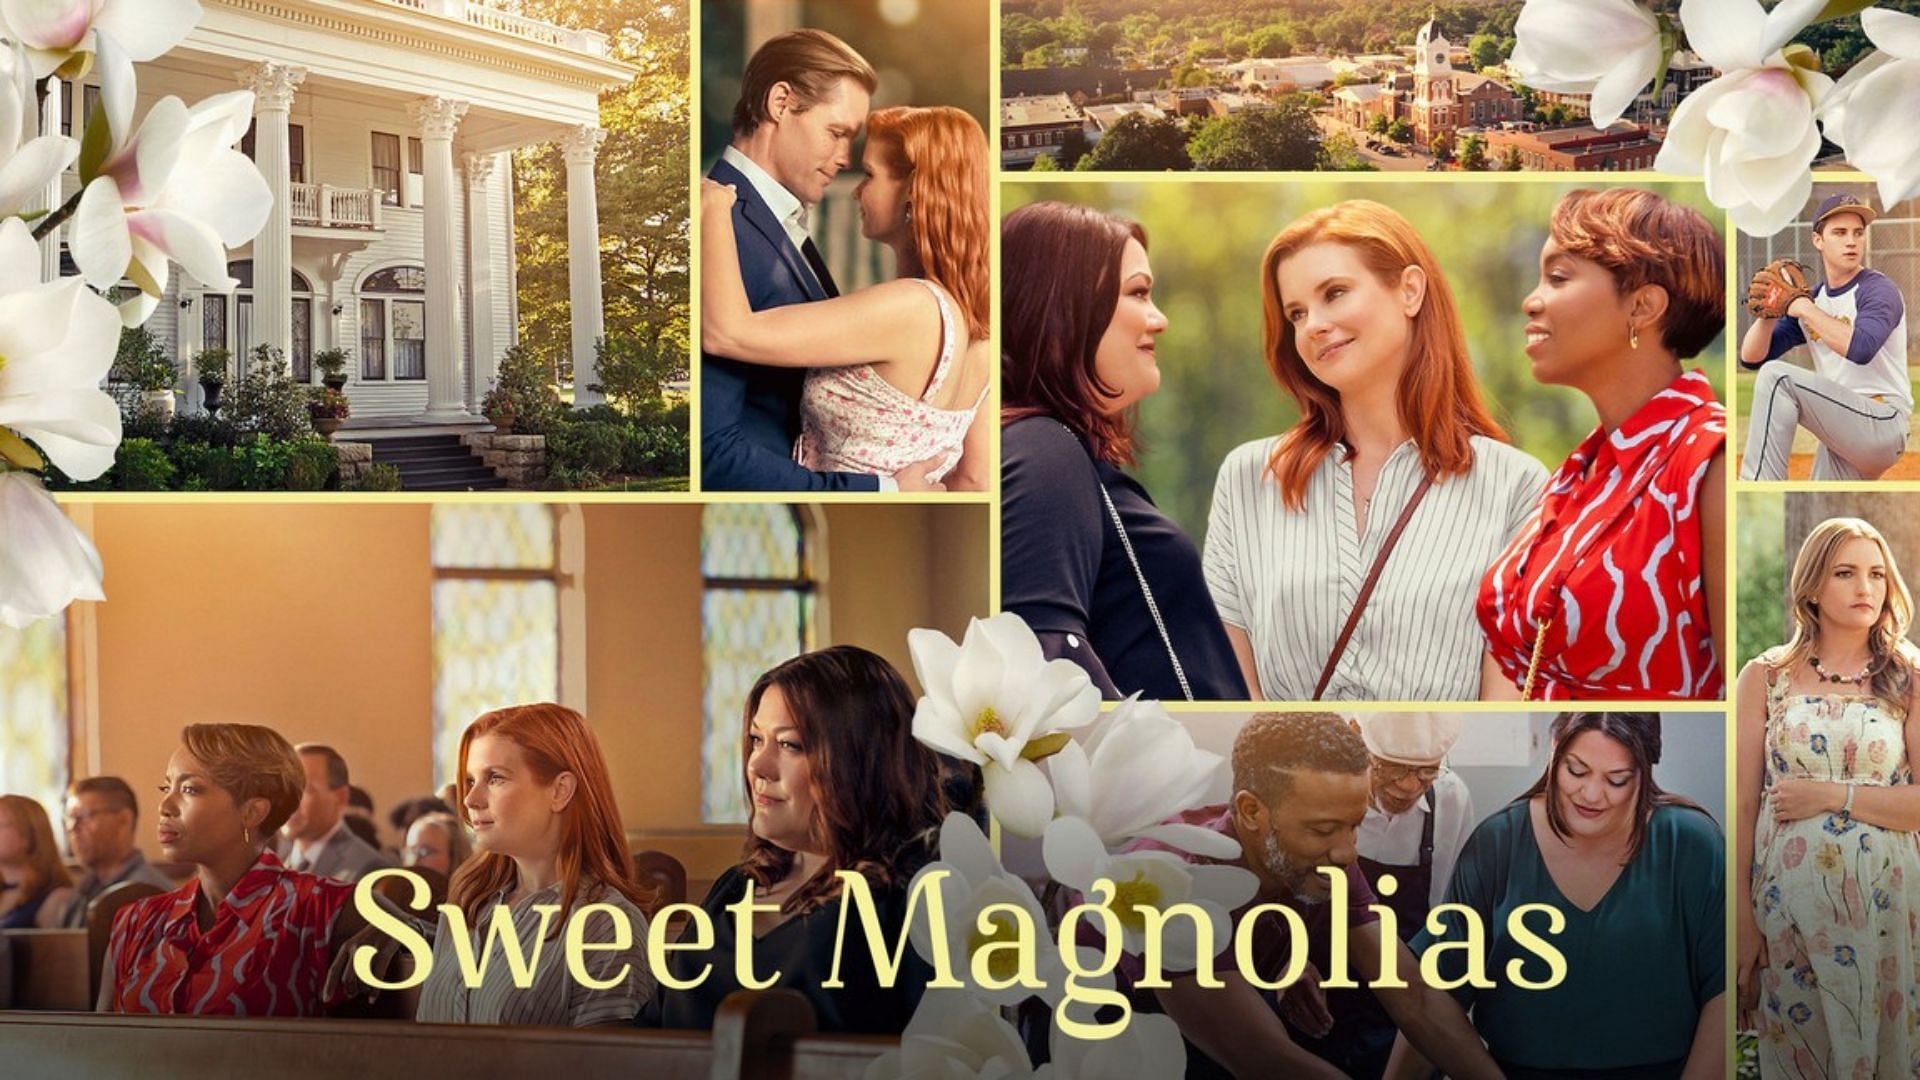 Sweet Magnolias season 3 Tentative release date, cast, what to expect